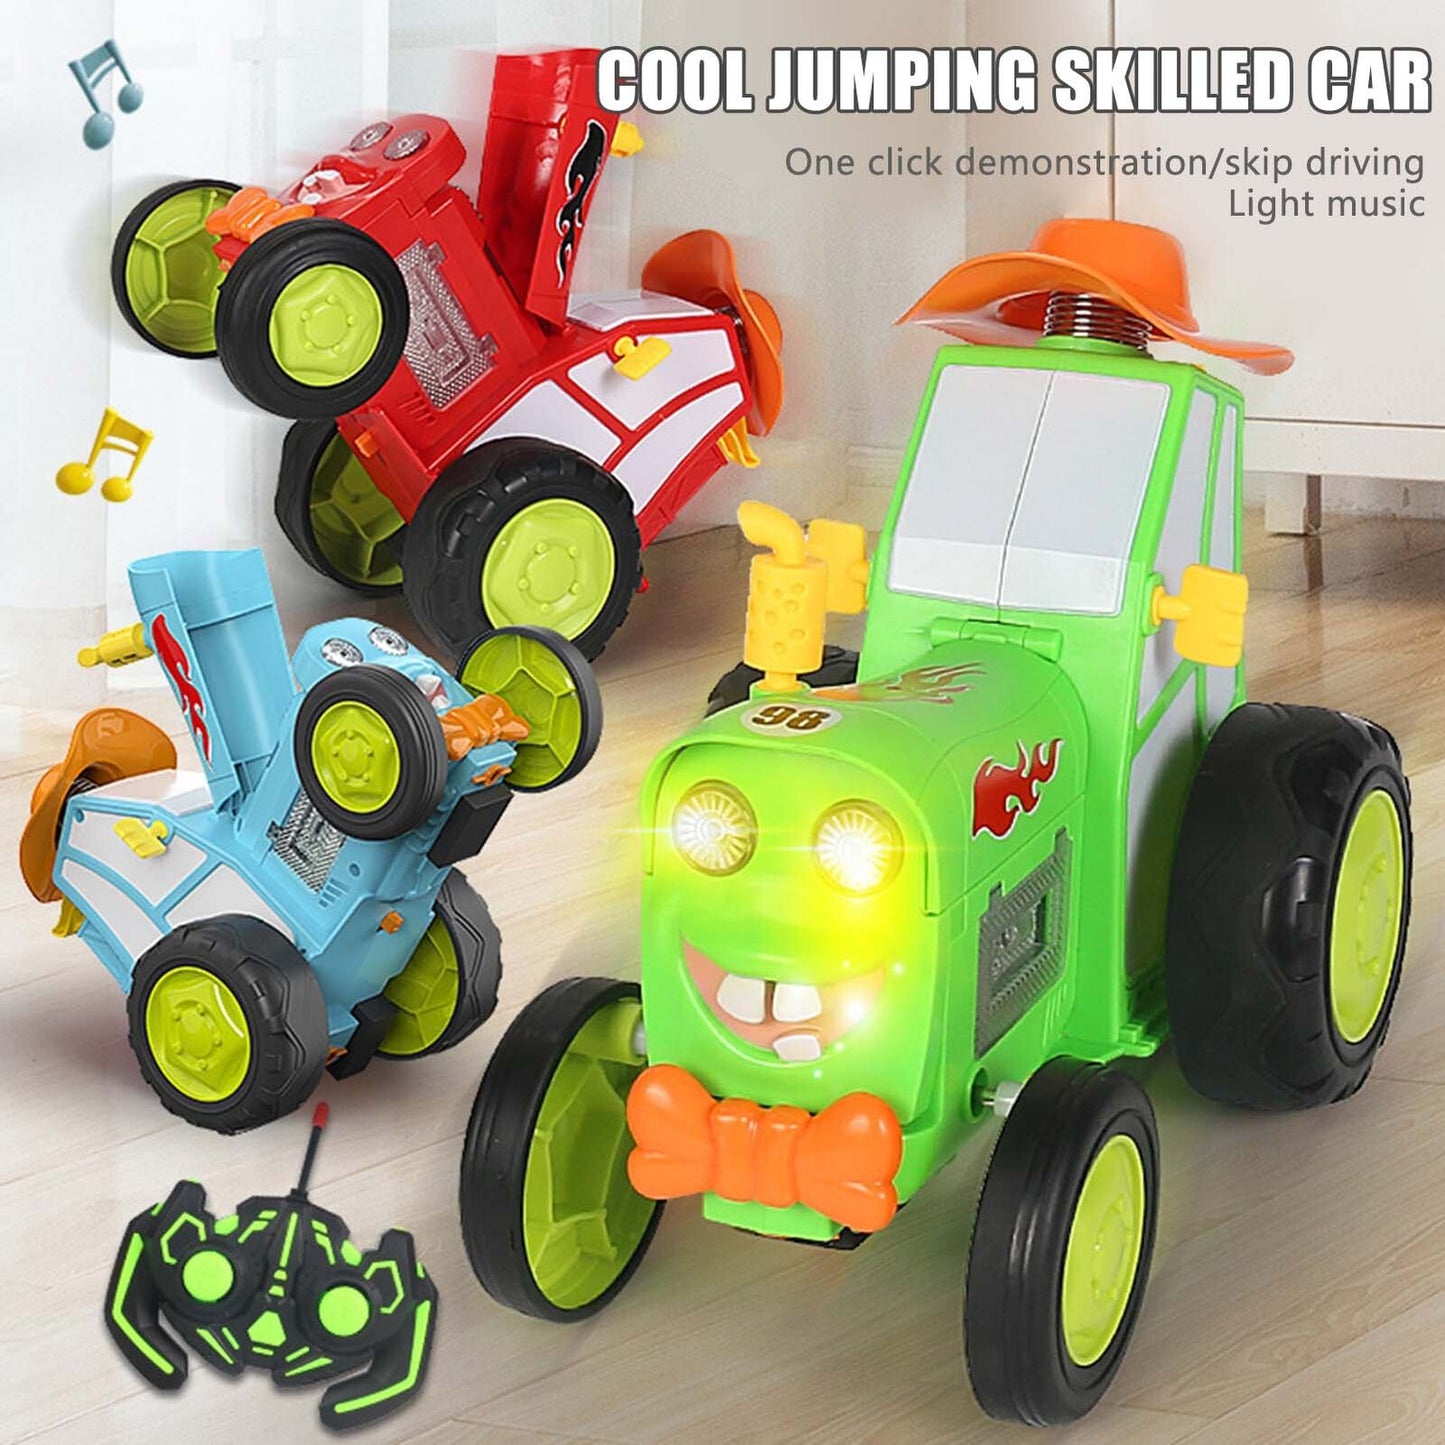 Green 360 Rotating Crazy Jumping Car with Light Music Remote Control RC Stunt Car AU